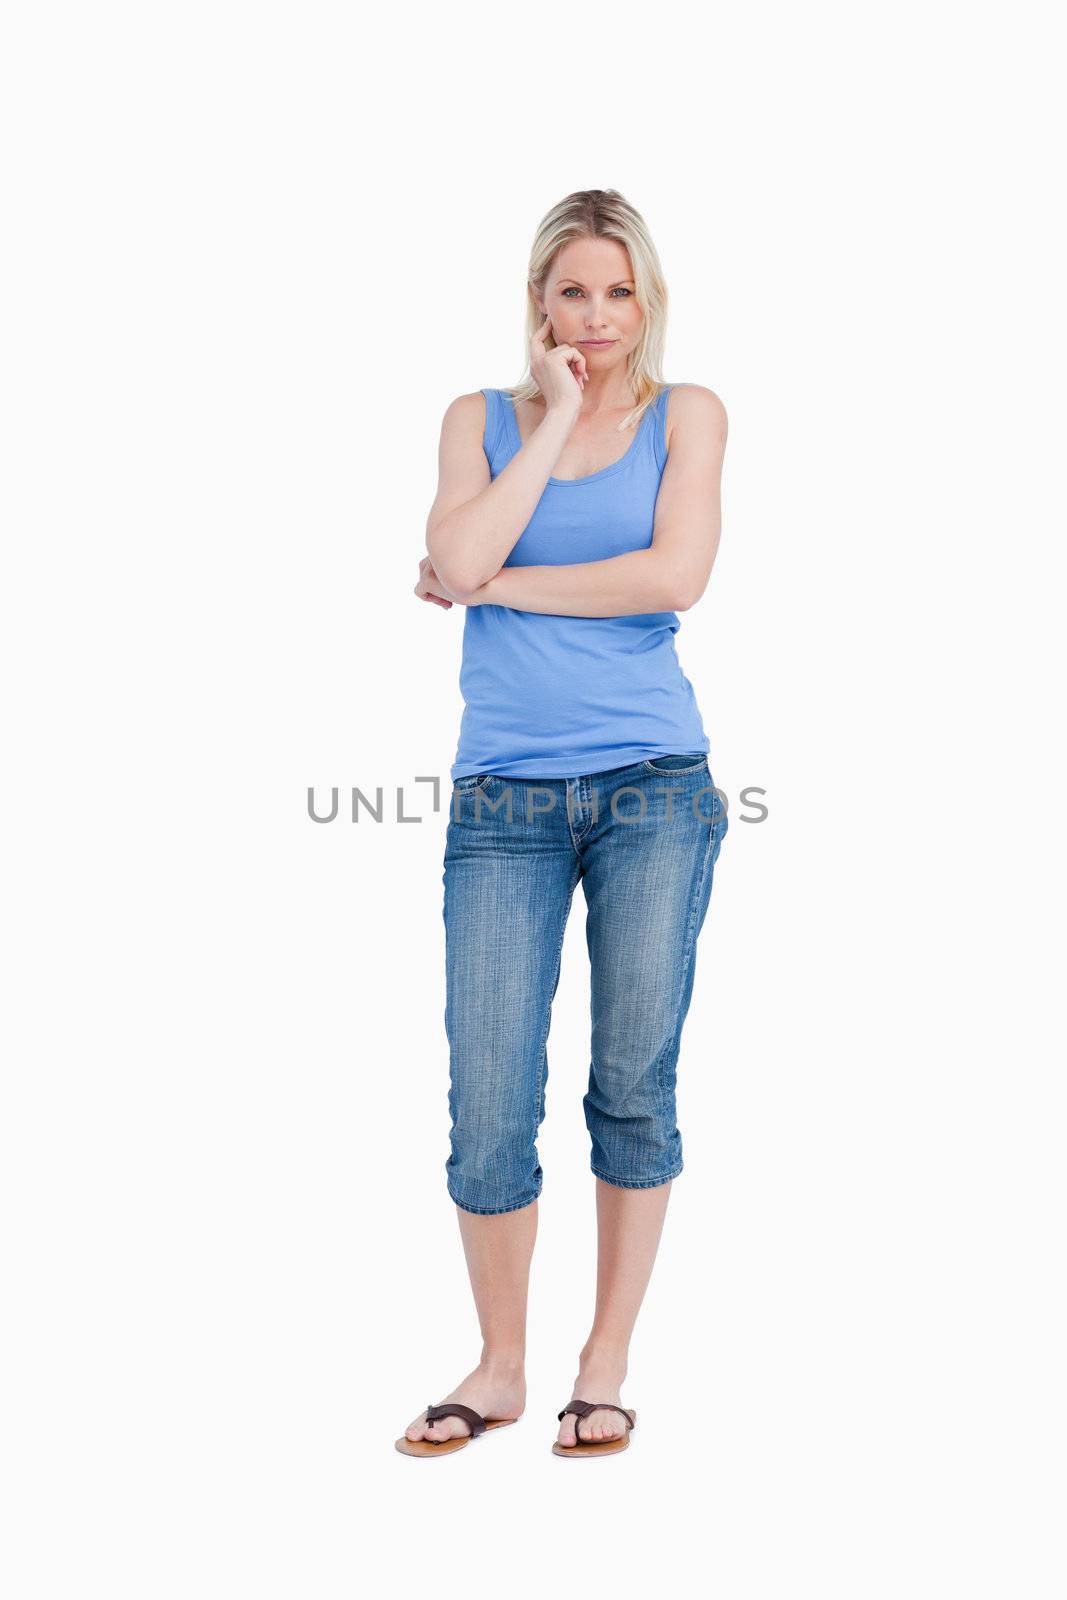 Blonde woman standing up with finger on her cheek against a white background